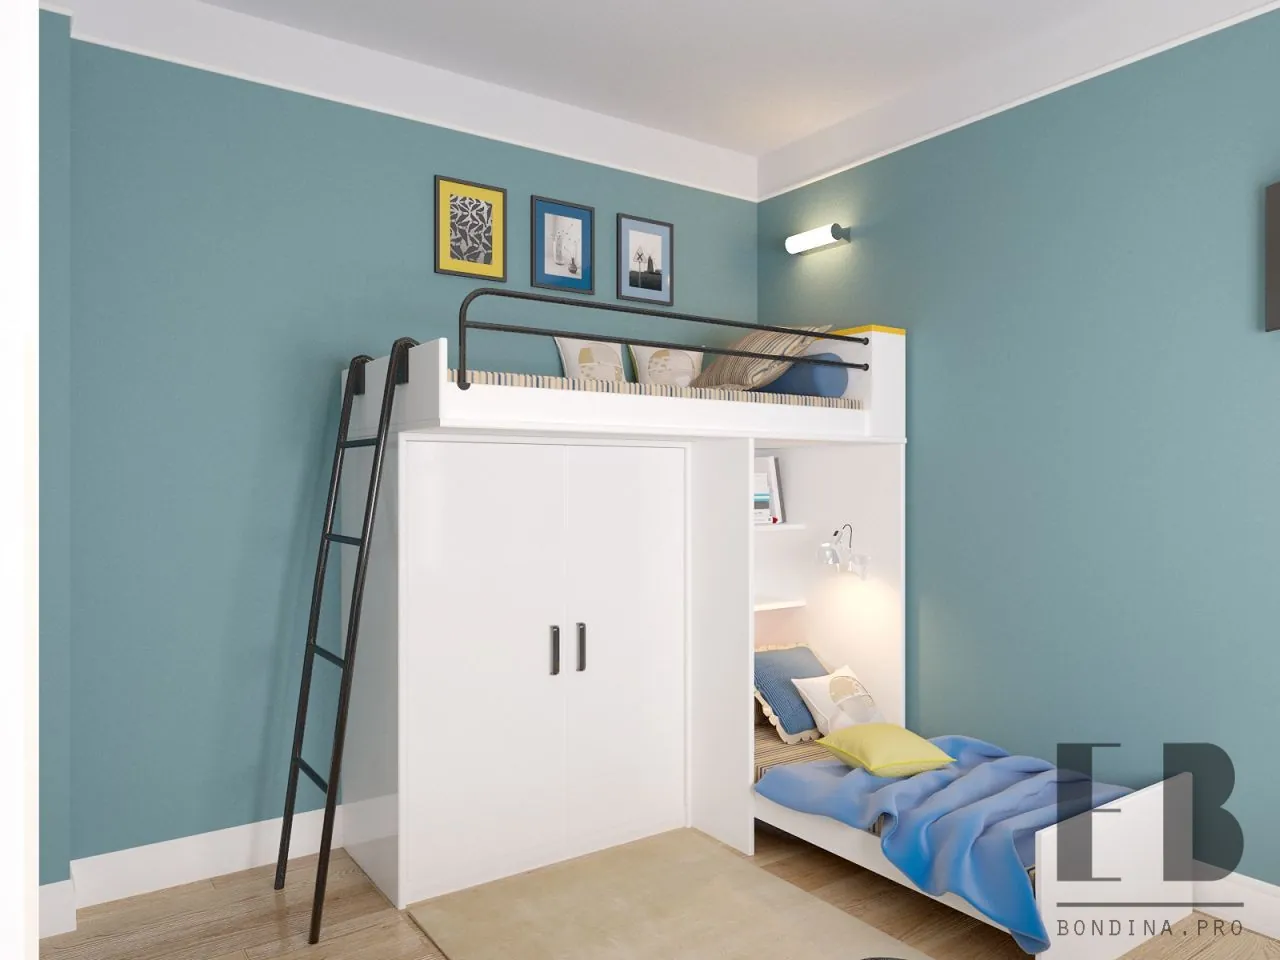 Boys shared bedroom design with white twin bunk